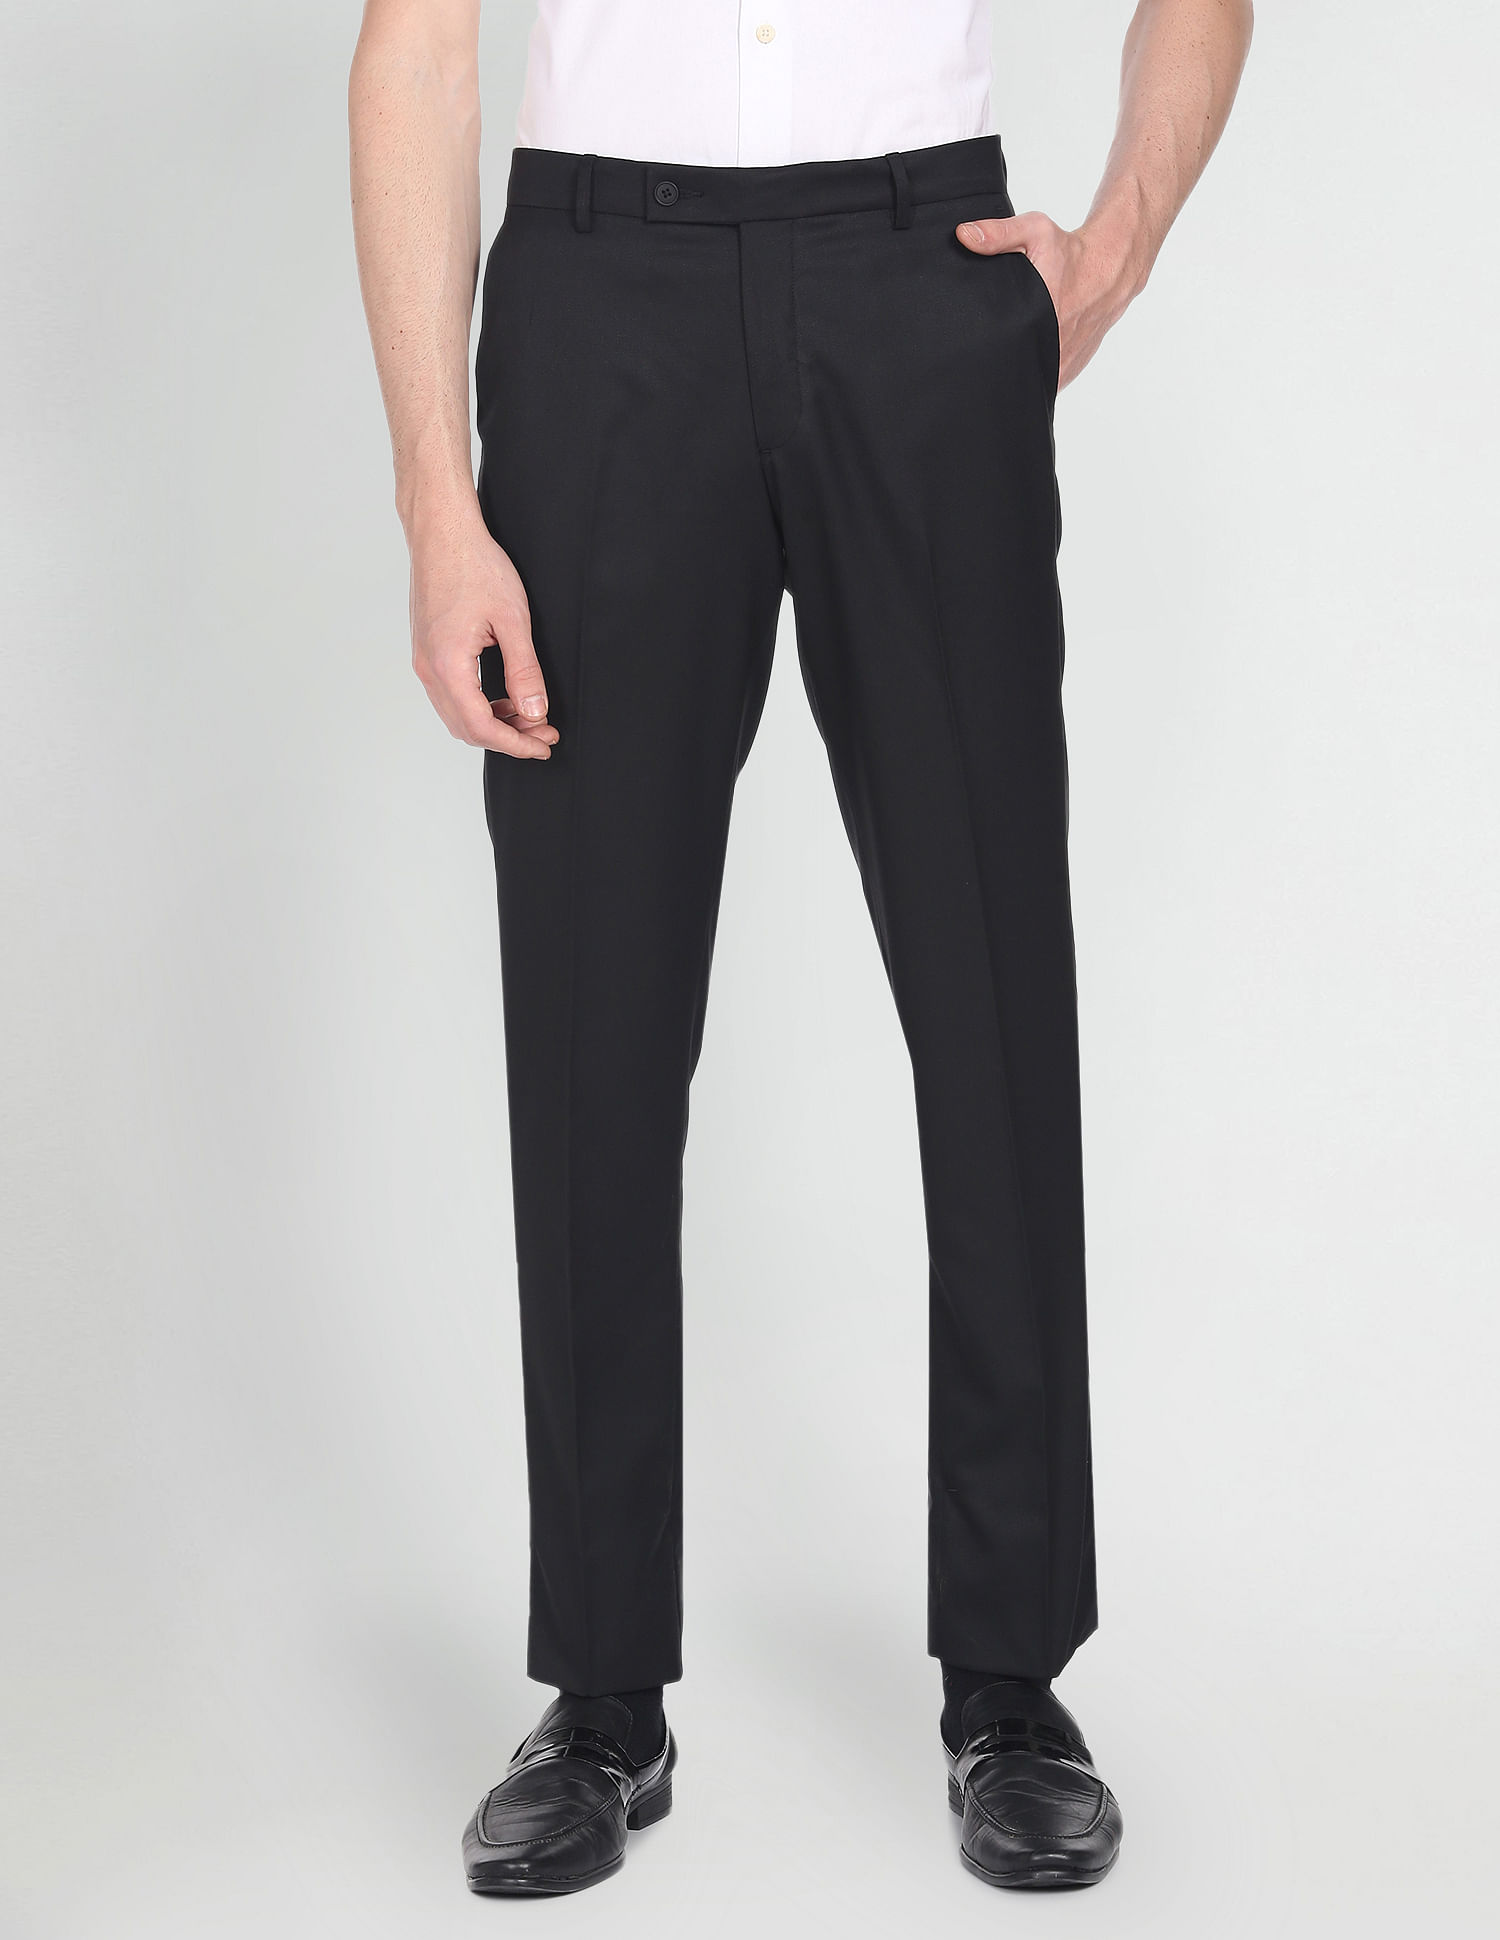 Buy Arrow Self Design Tailored Fit Formal Trouser - NNNOW.com